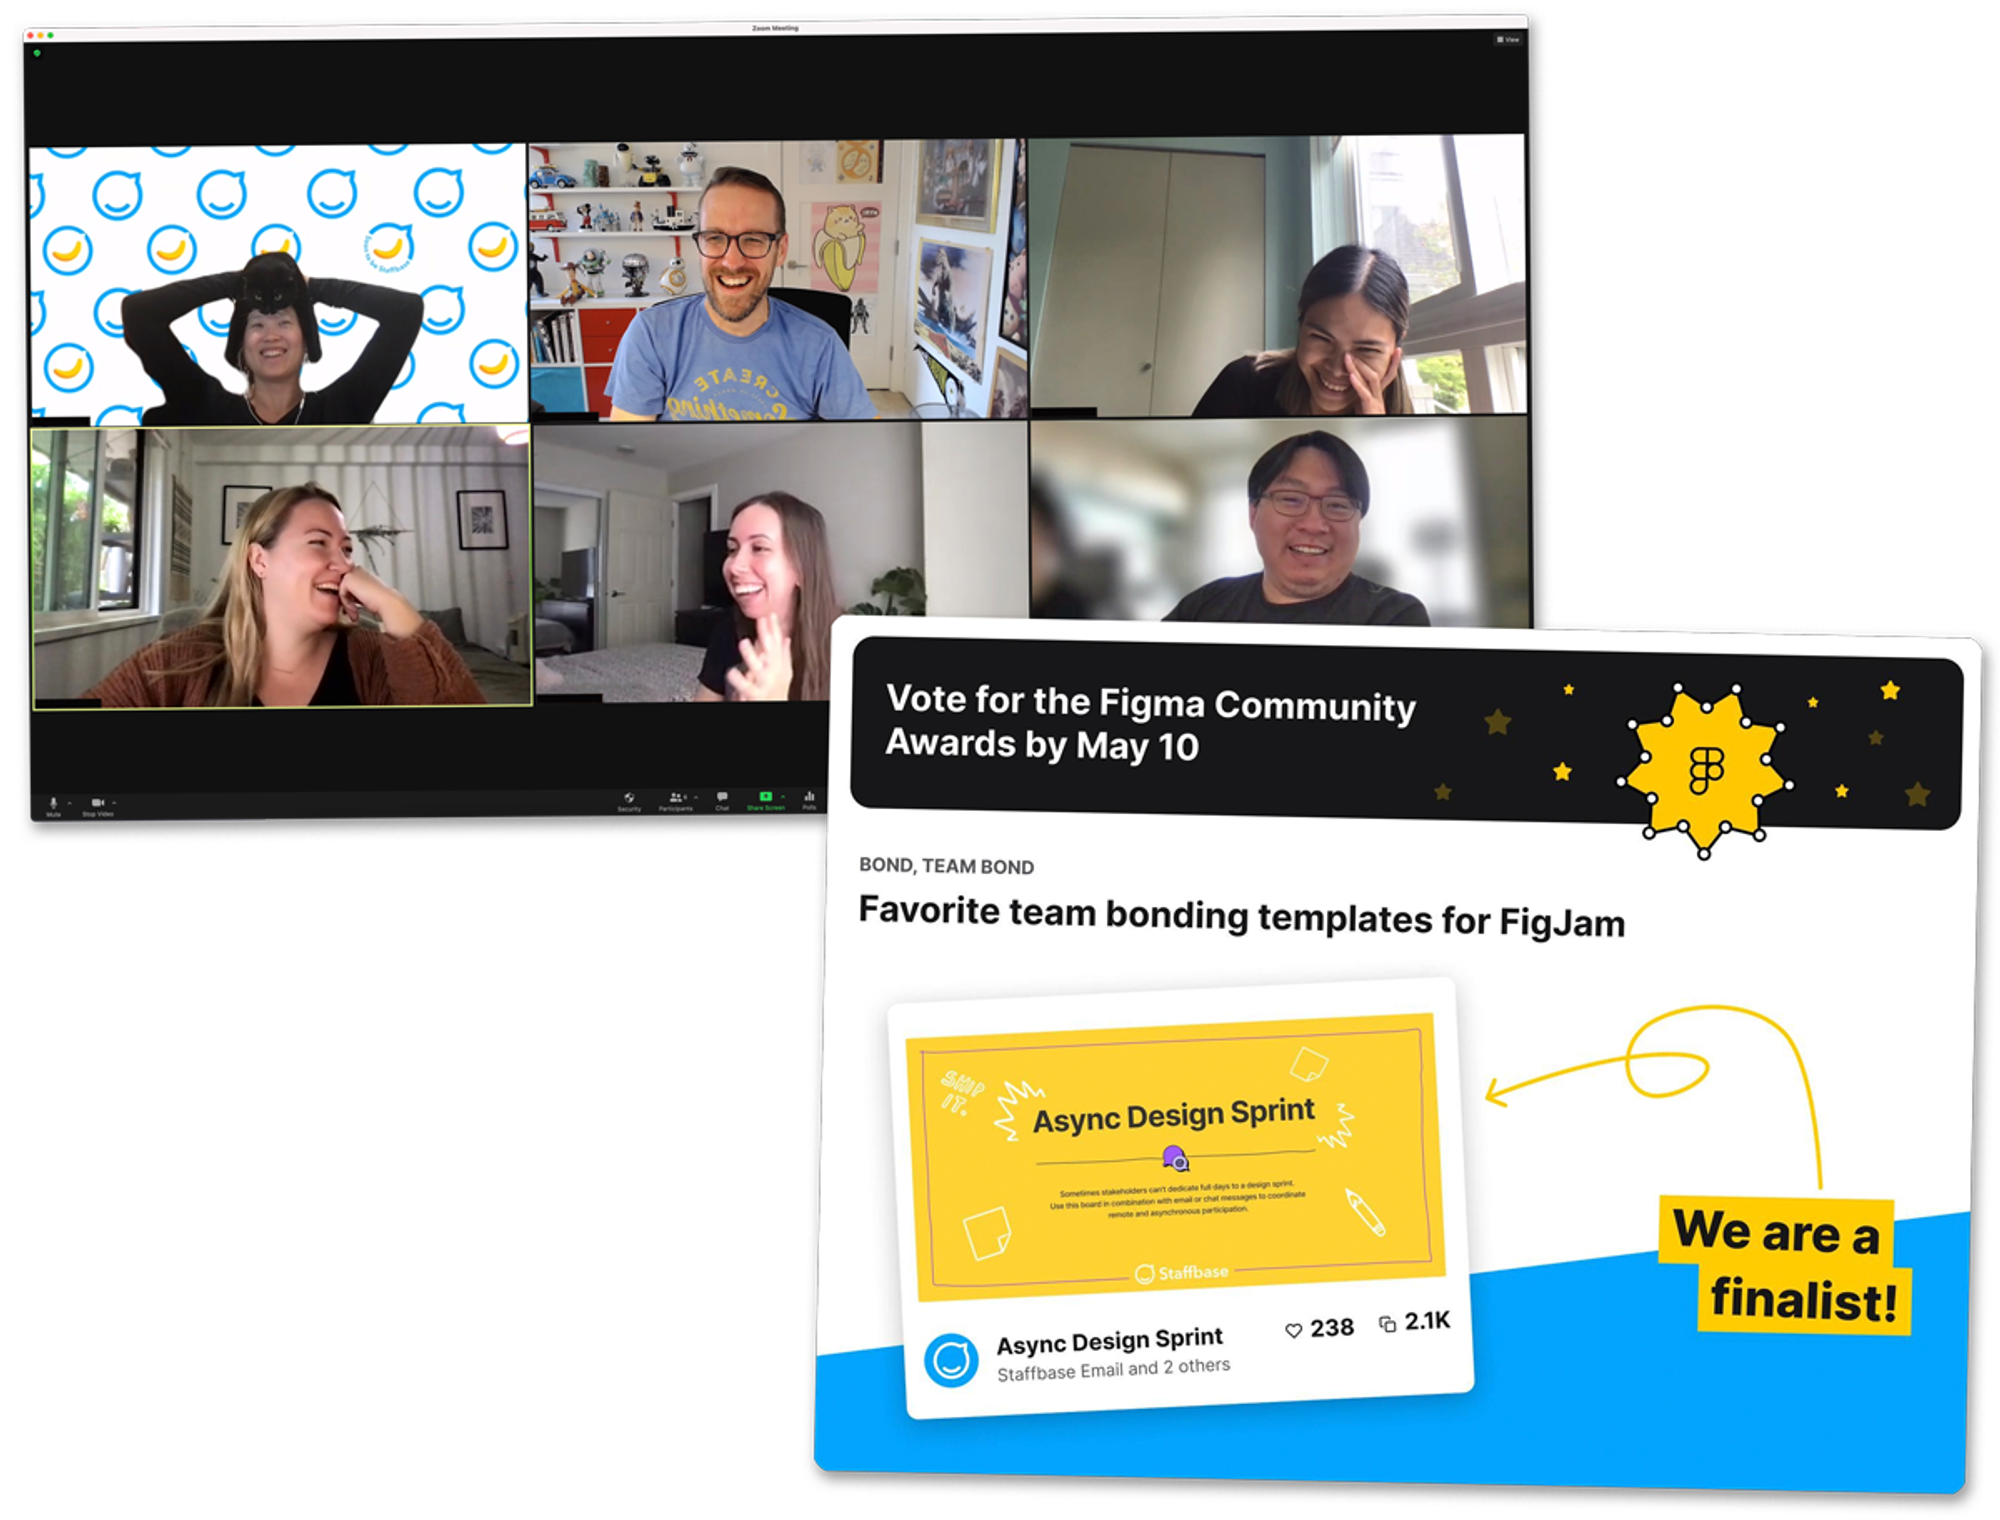 Screenshot of our design team laughing in Zoom with our Async Design Sprint finalist announcement overlayed on top